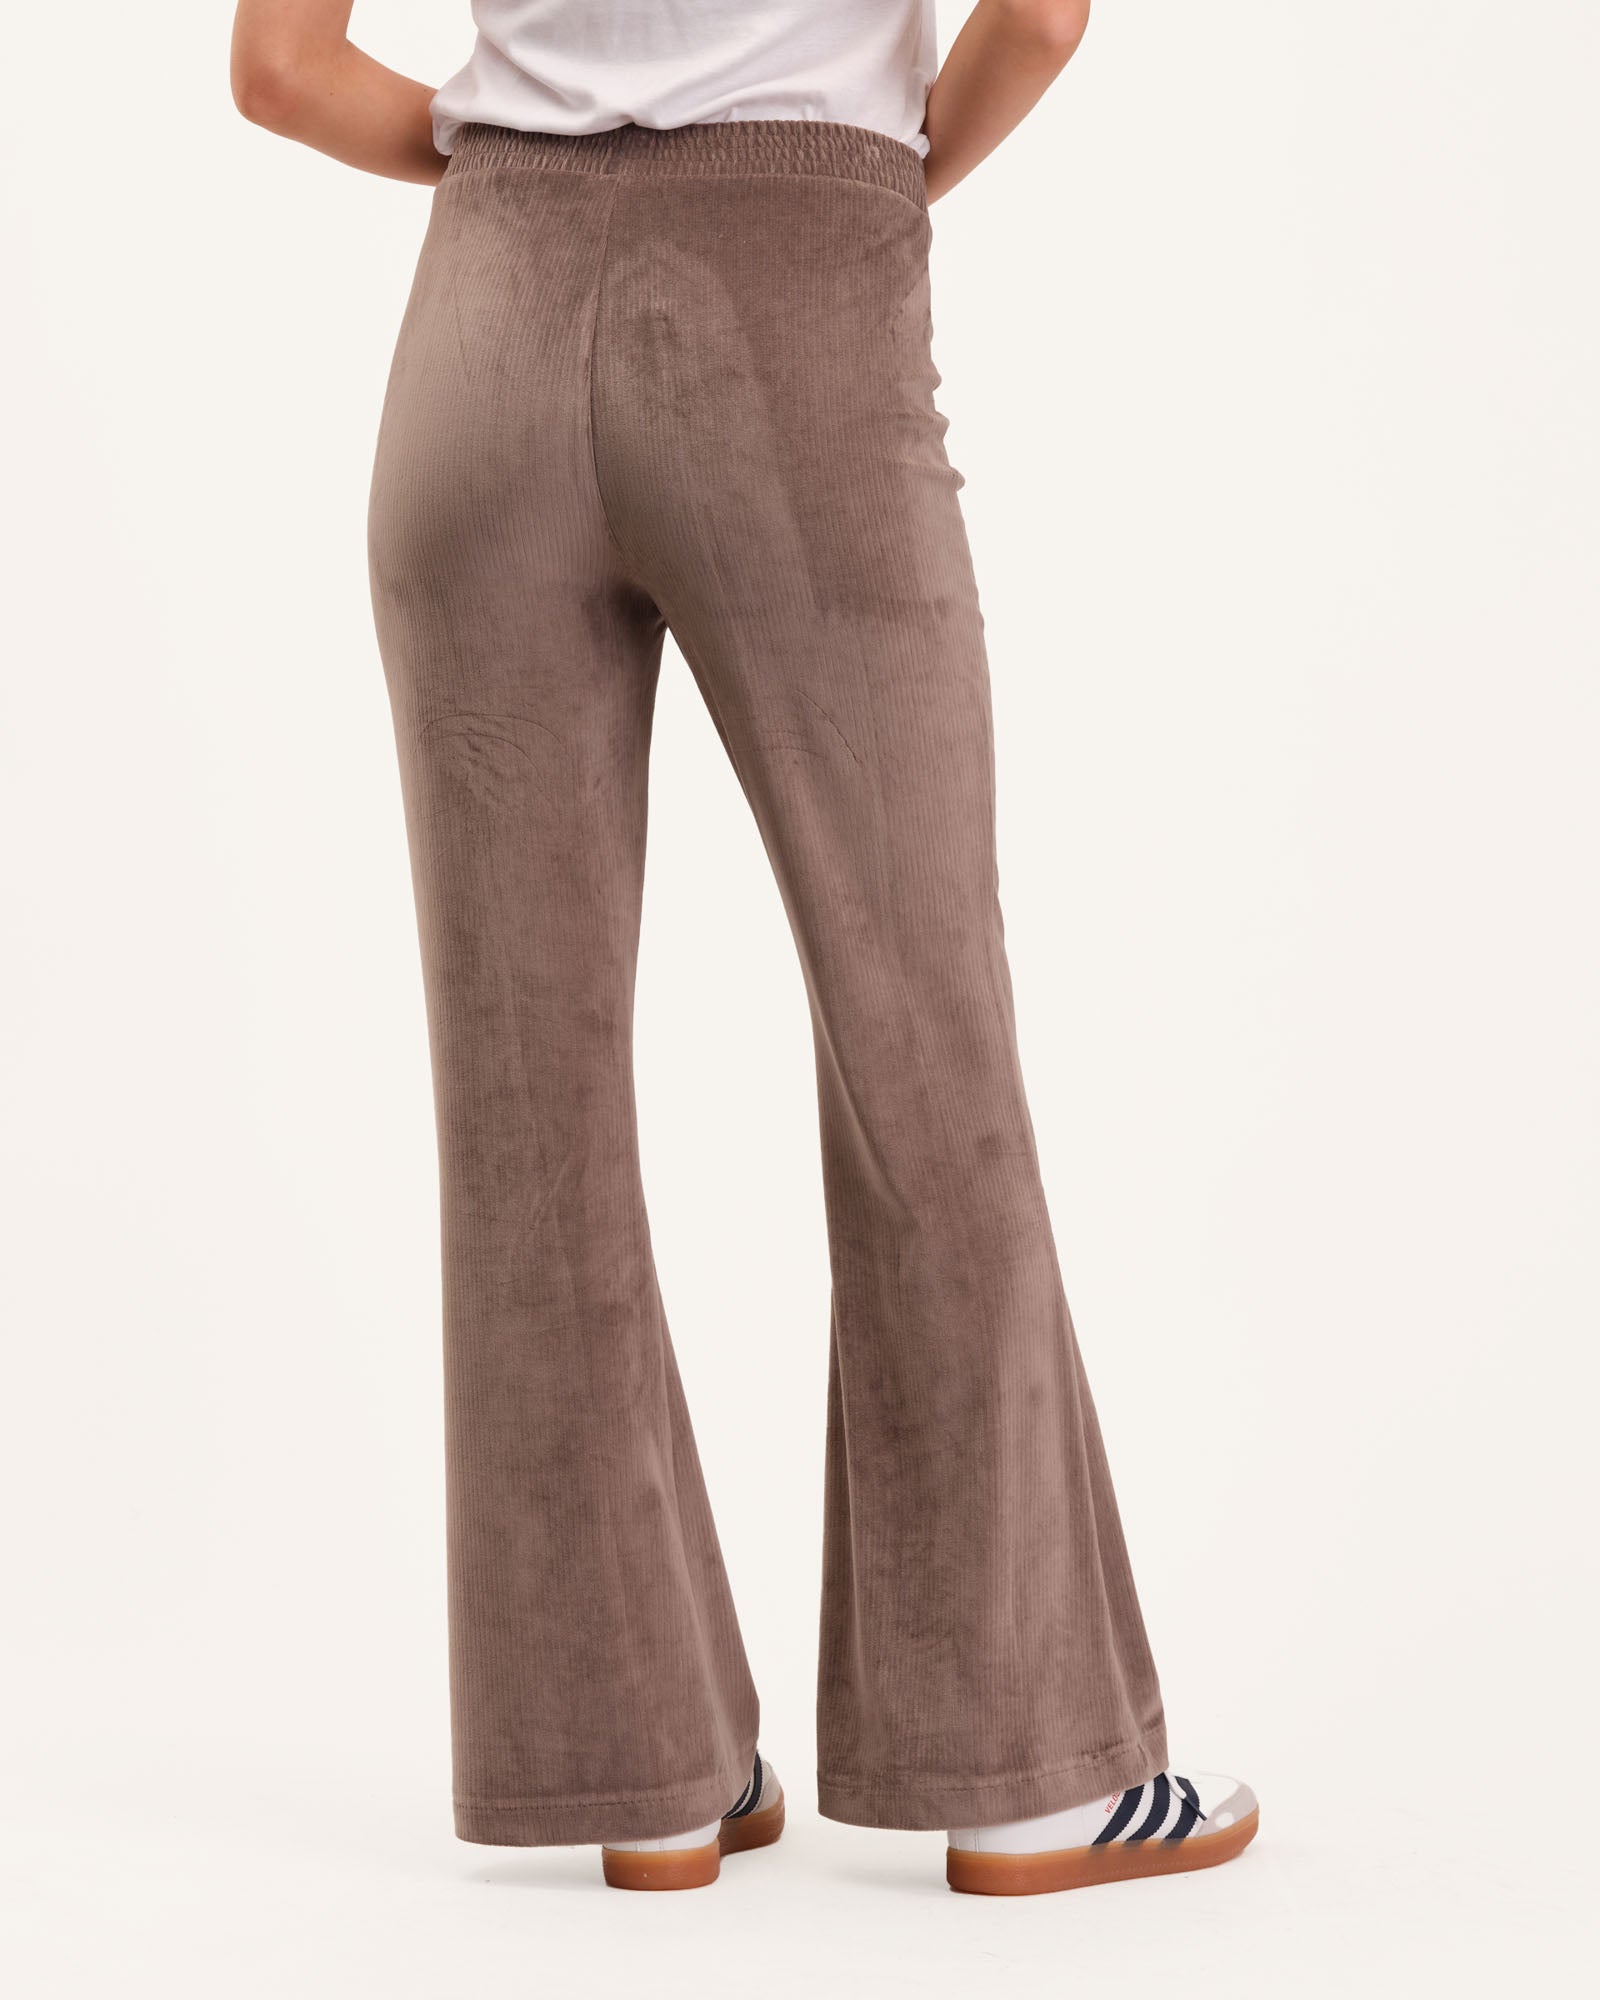 WEST OF MELROSE Womens Corduroy Flare Pants - ShopStyle